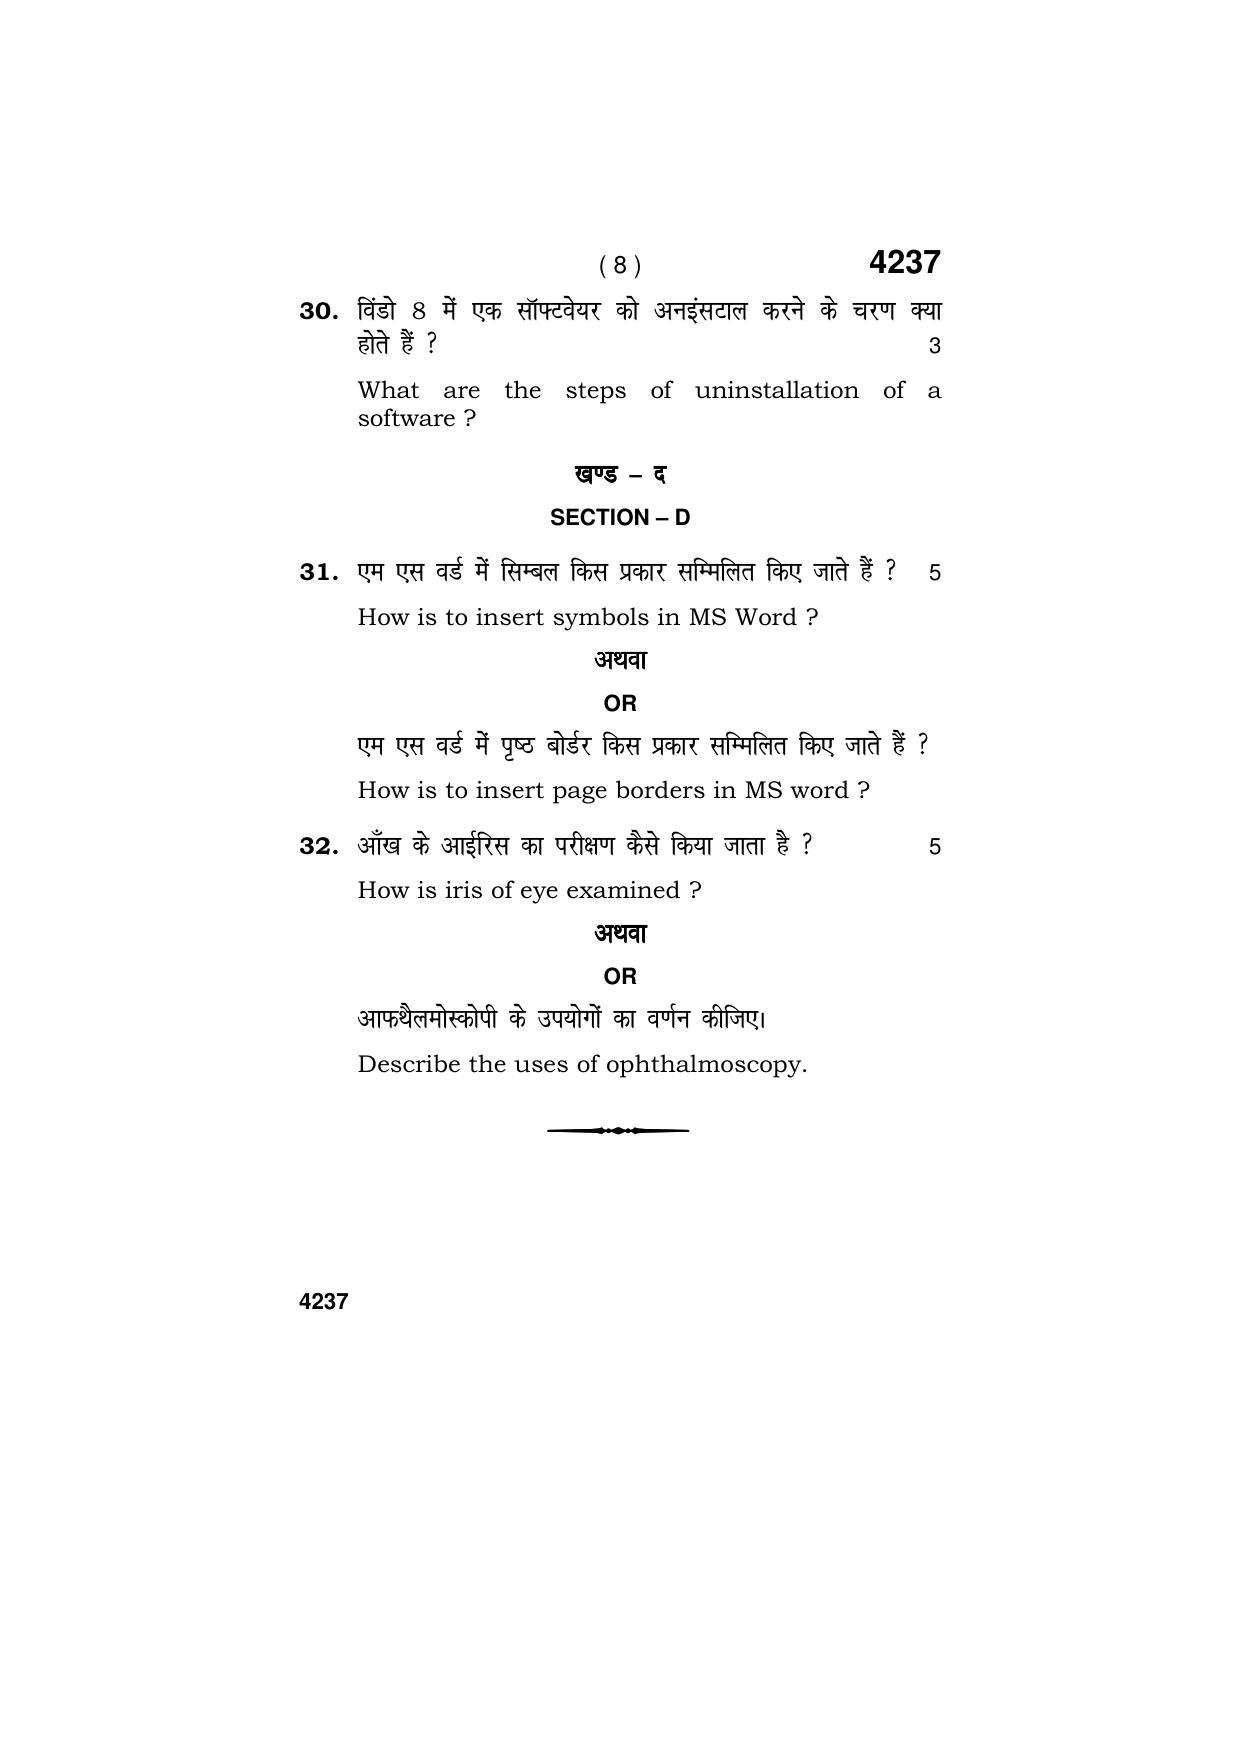 Haryana Board HBSE Class 10 Vision Technician 2019 Question Paper - Page 8